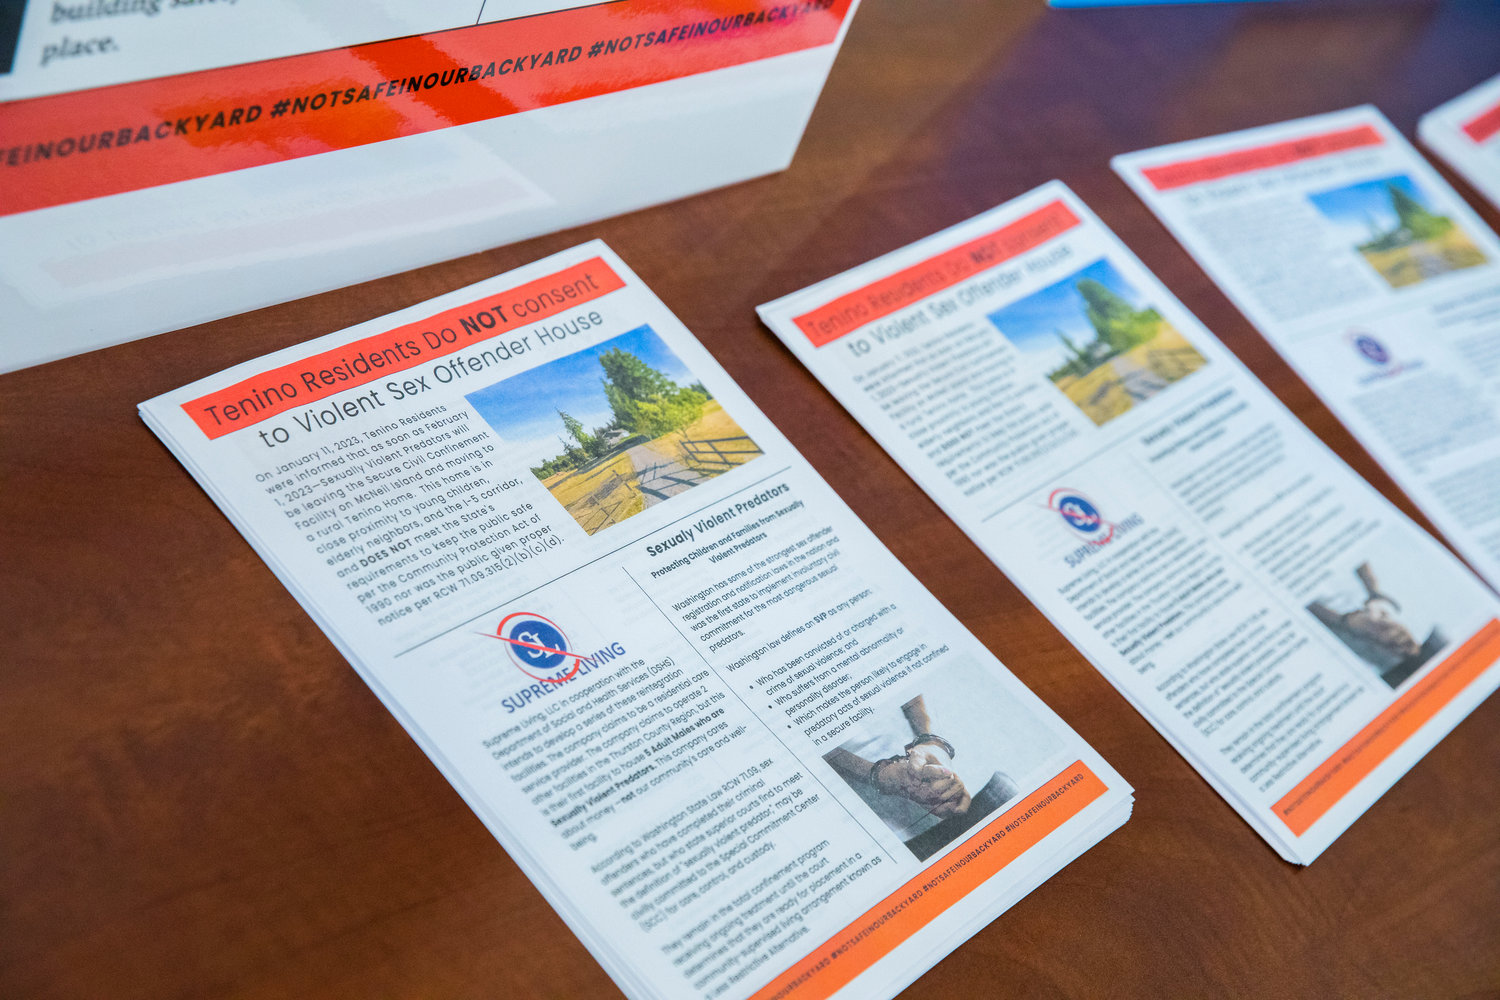 Flyers, with messages in opposition of Supreme Living, sit on display during a meeting with Thurston County Commissioners in Olympia on Tuesday.